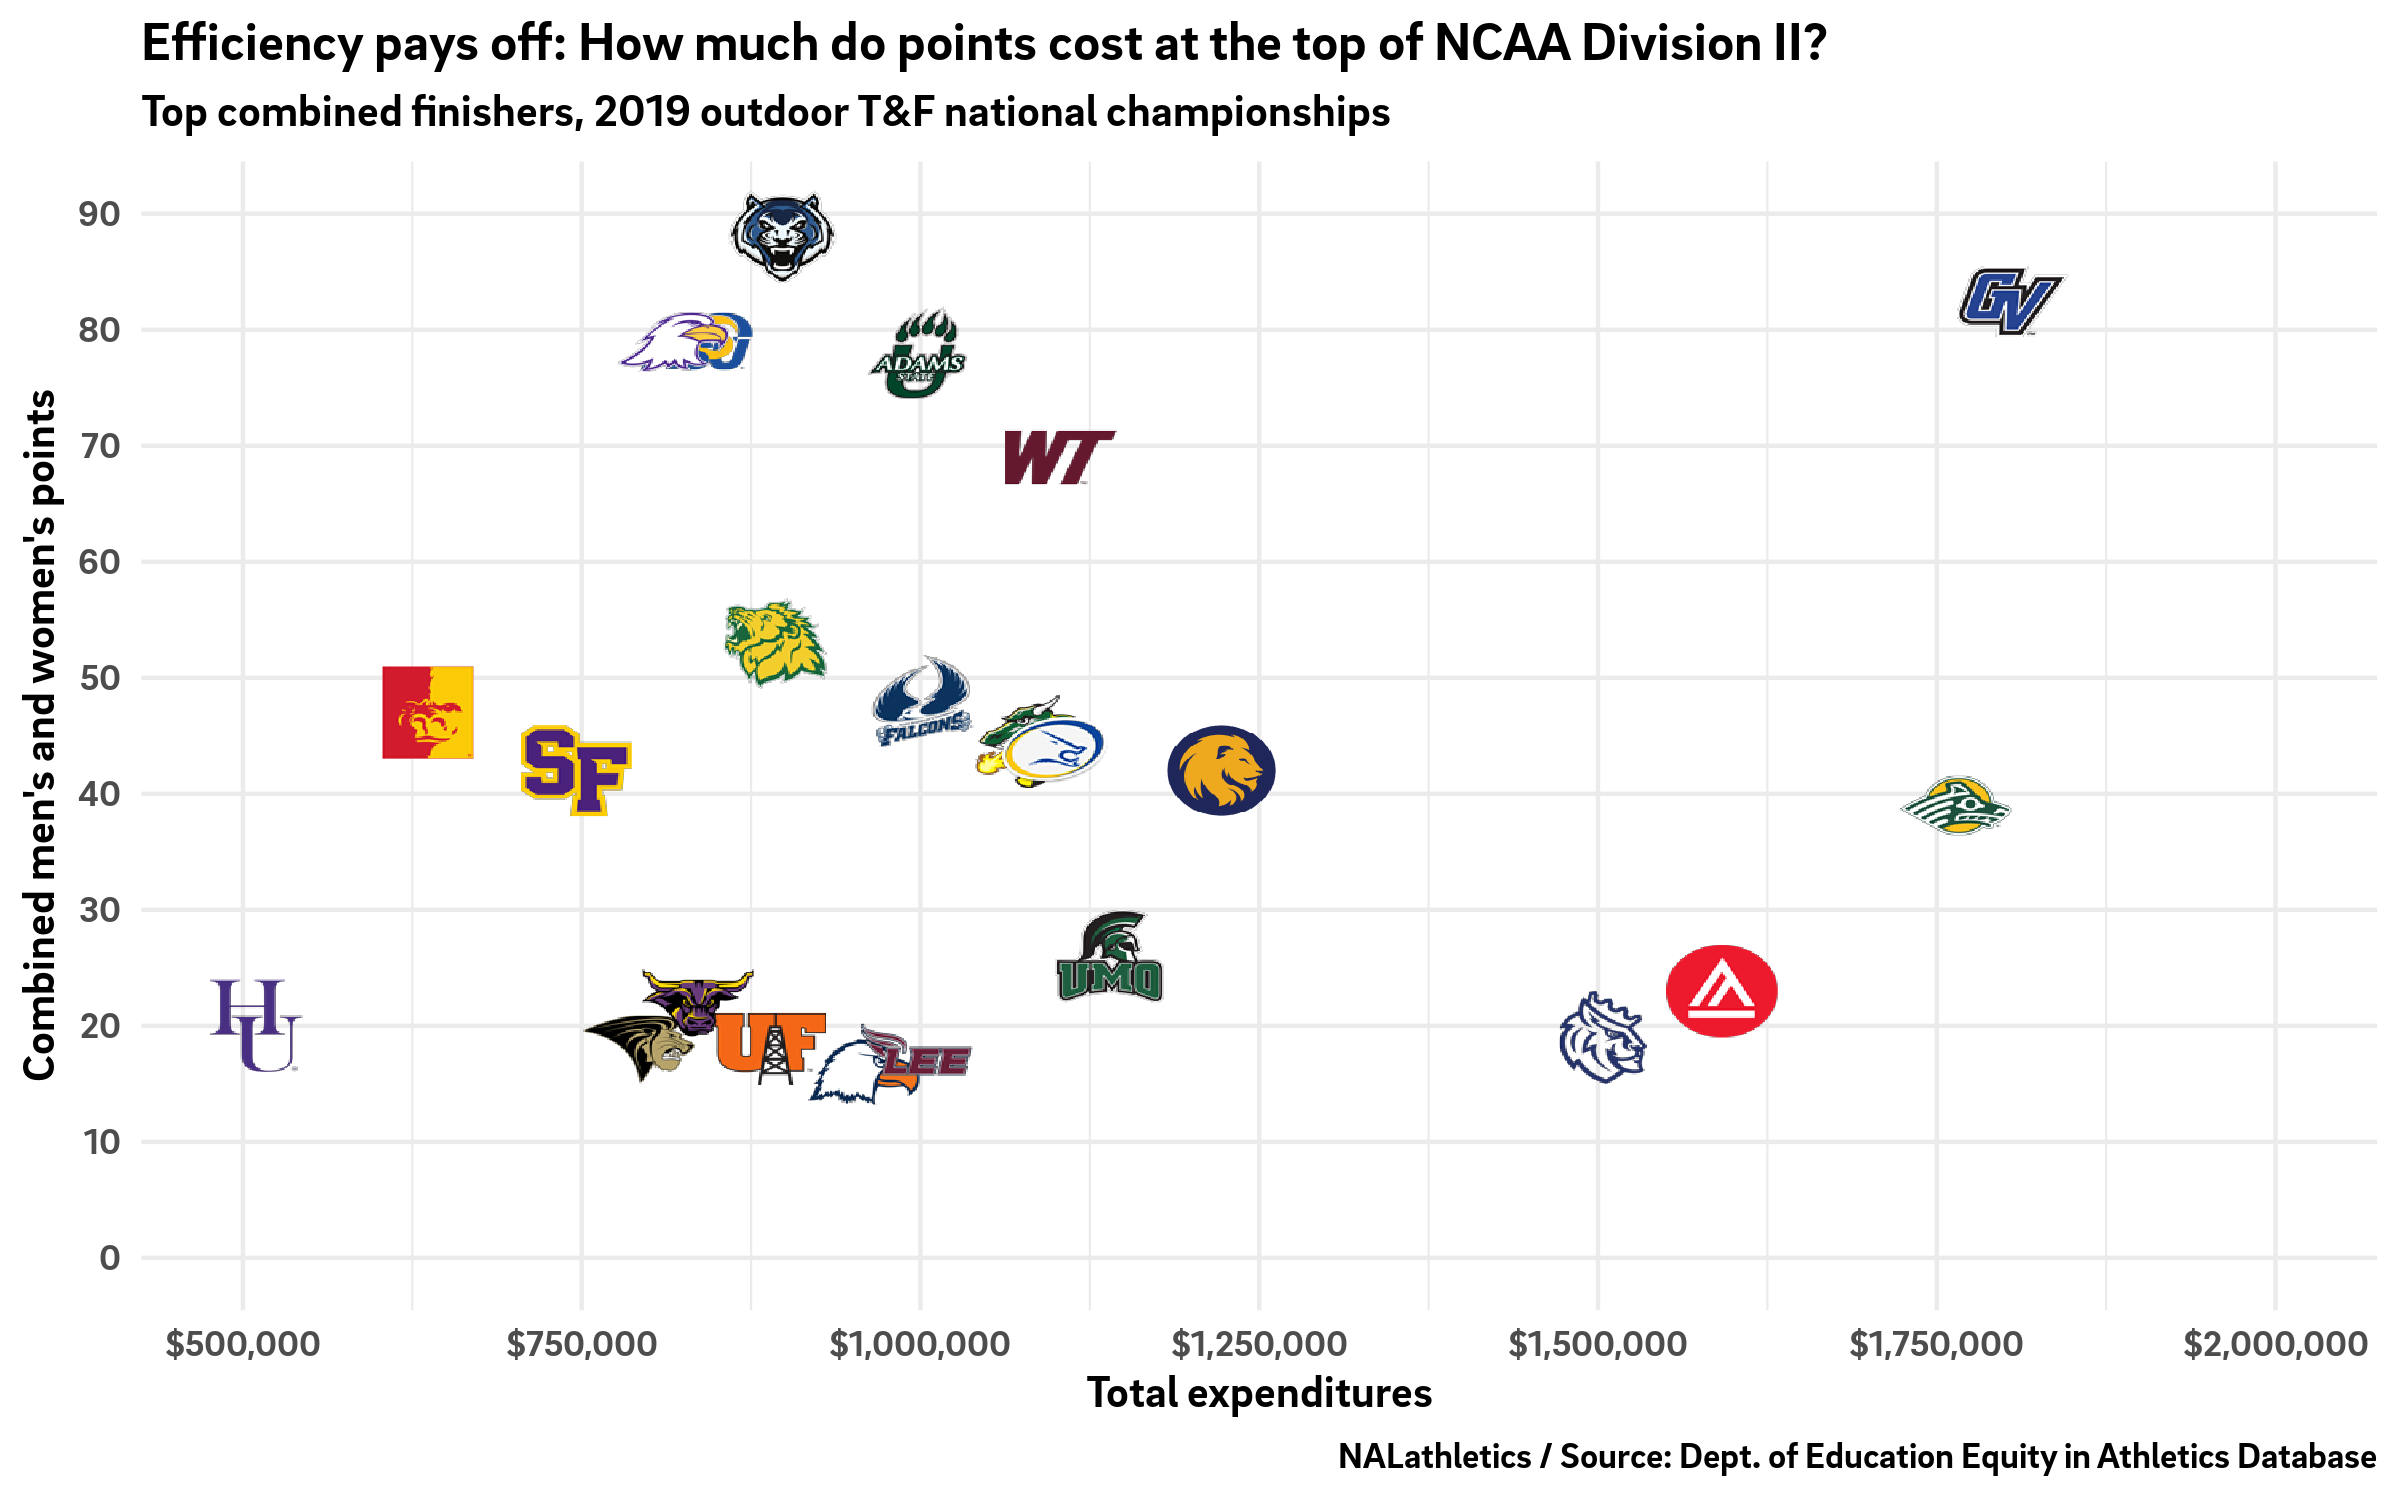 NCAA Division II track & field combined points vs. total spending